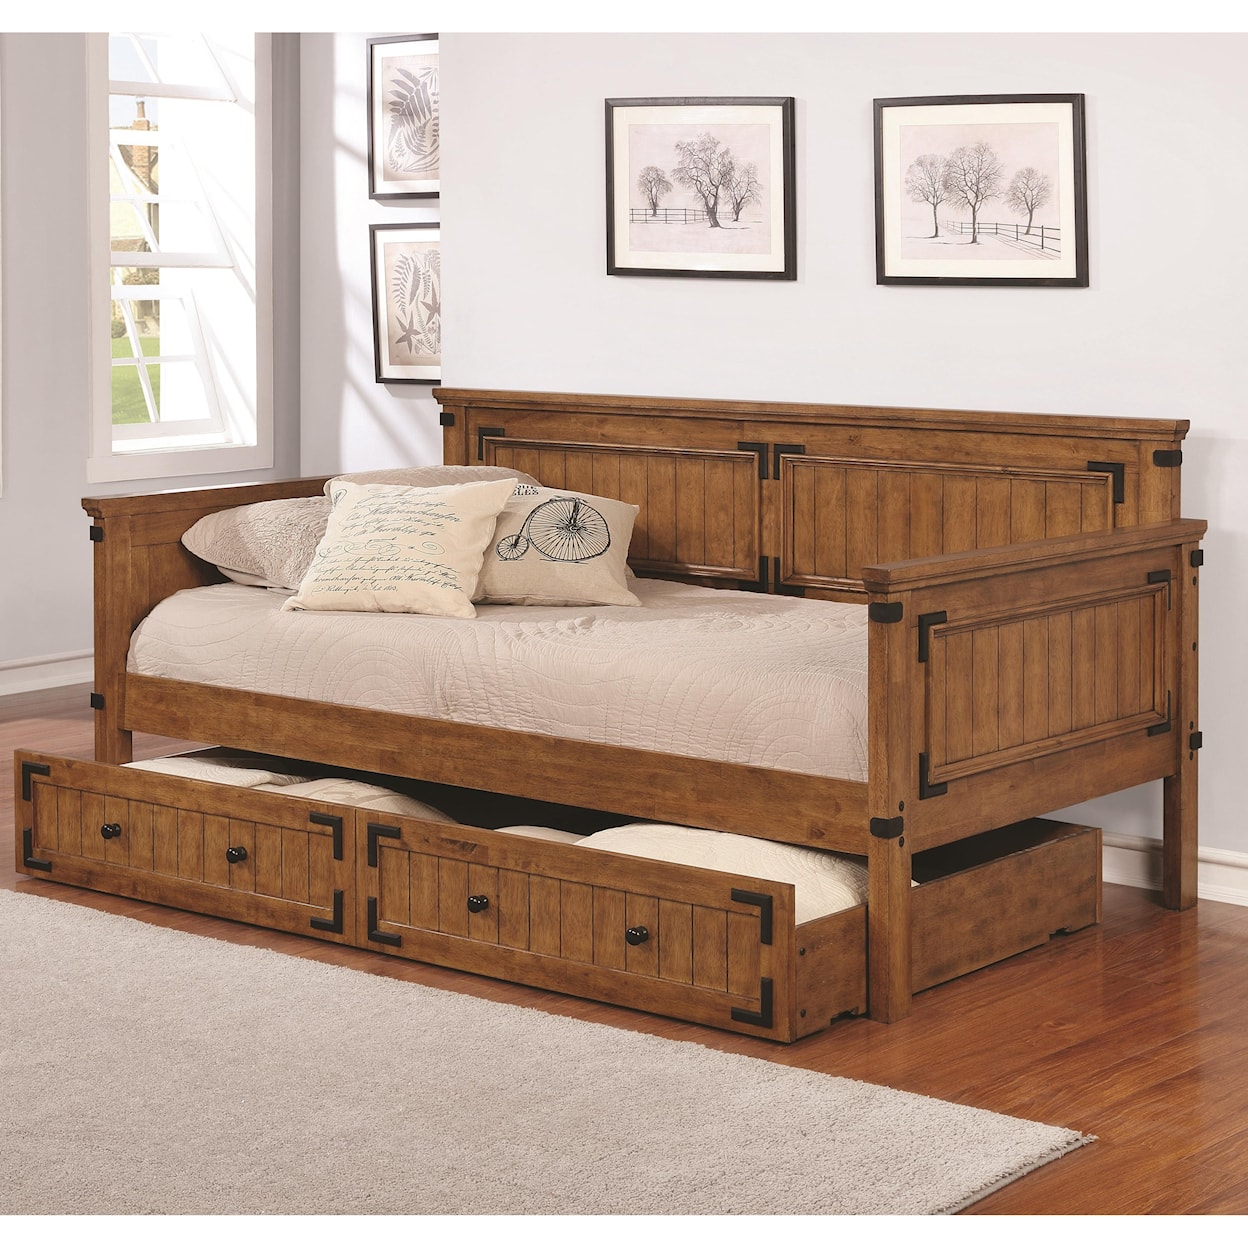 Coaster Daybeds by Coaster Daybed with Trundle